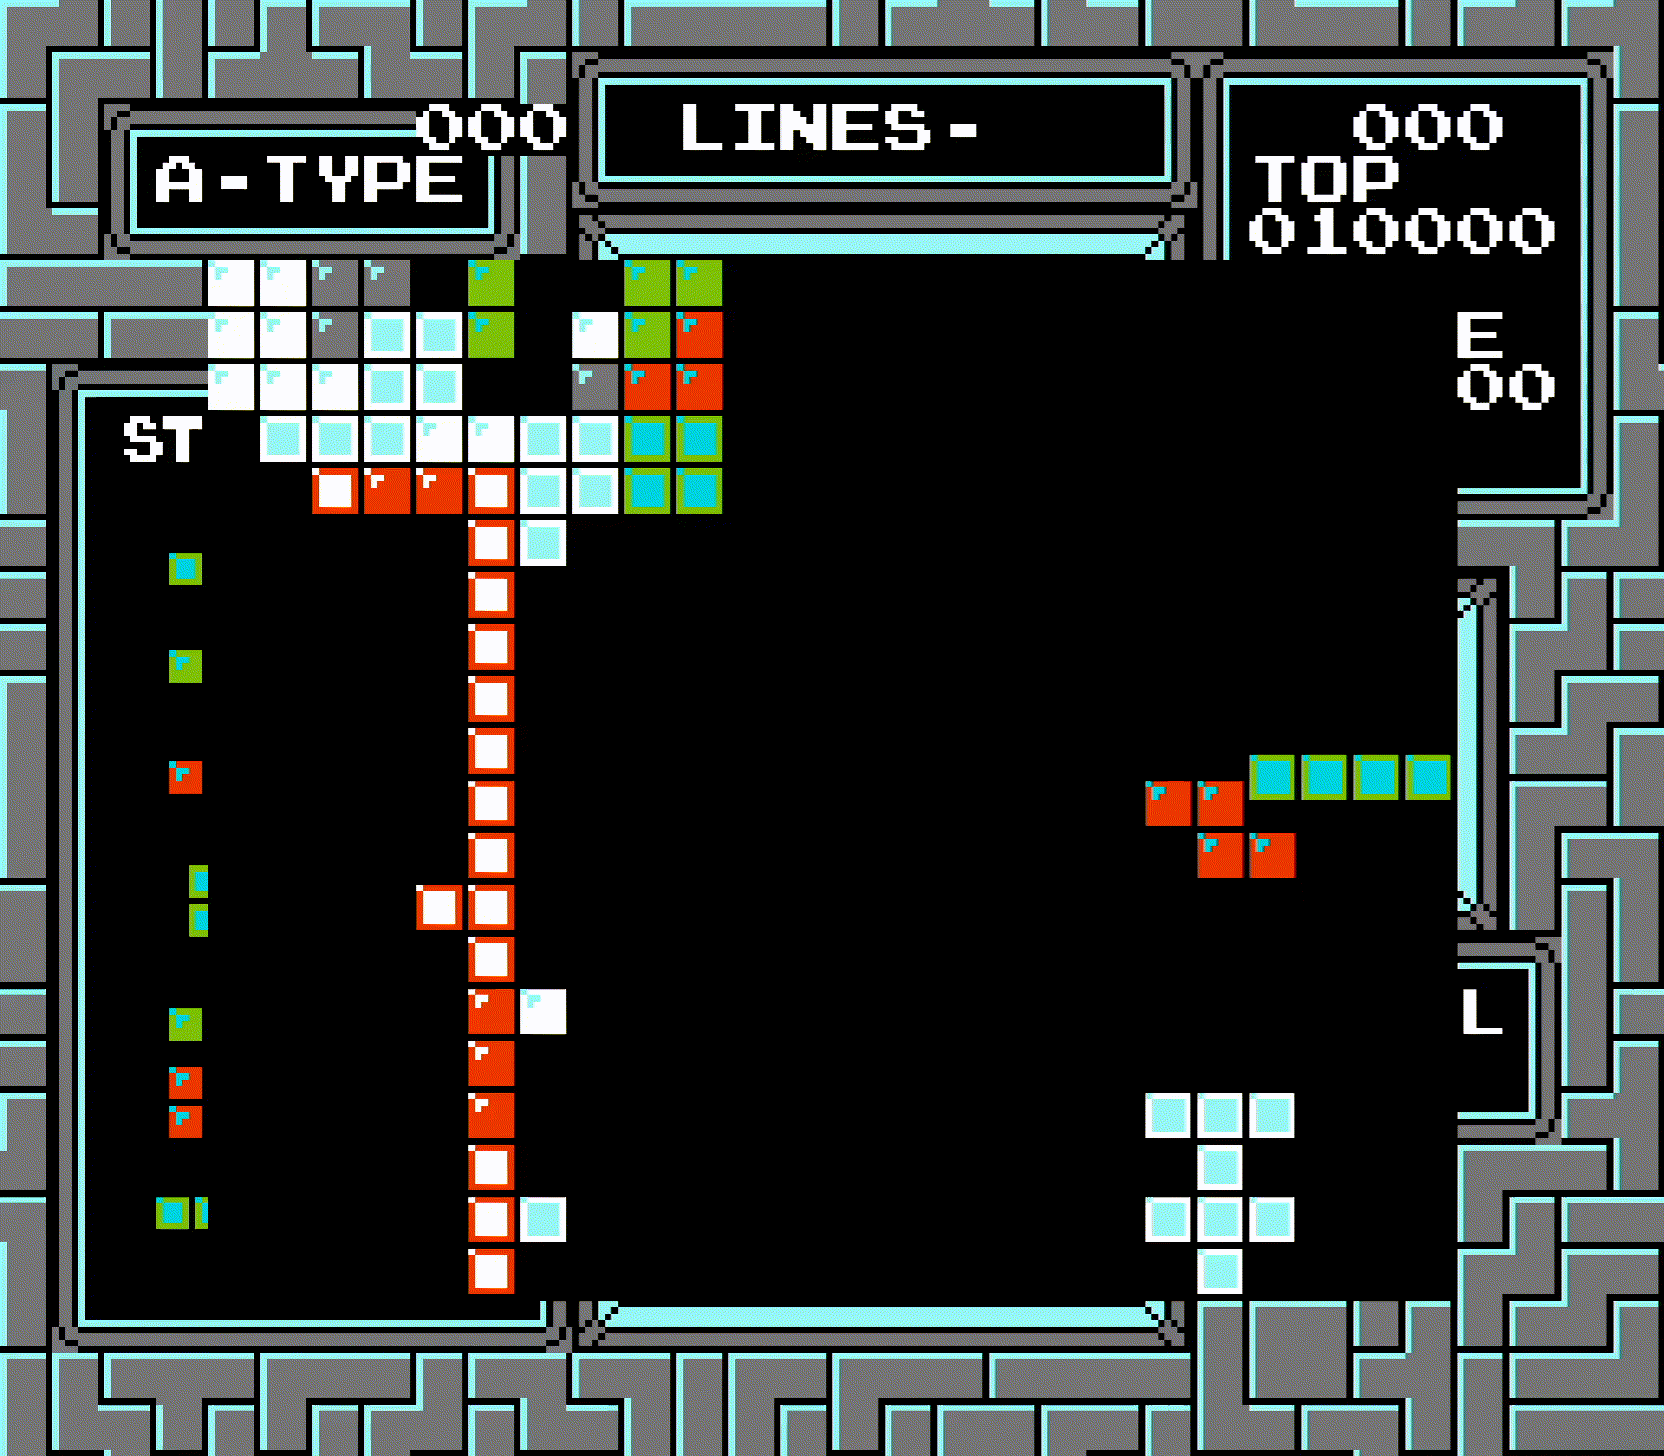 Player 1 clears the very top row, which results in some tiles overflowing onto the top row of player 2's board. The tiles disappear soon after.